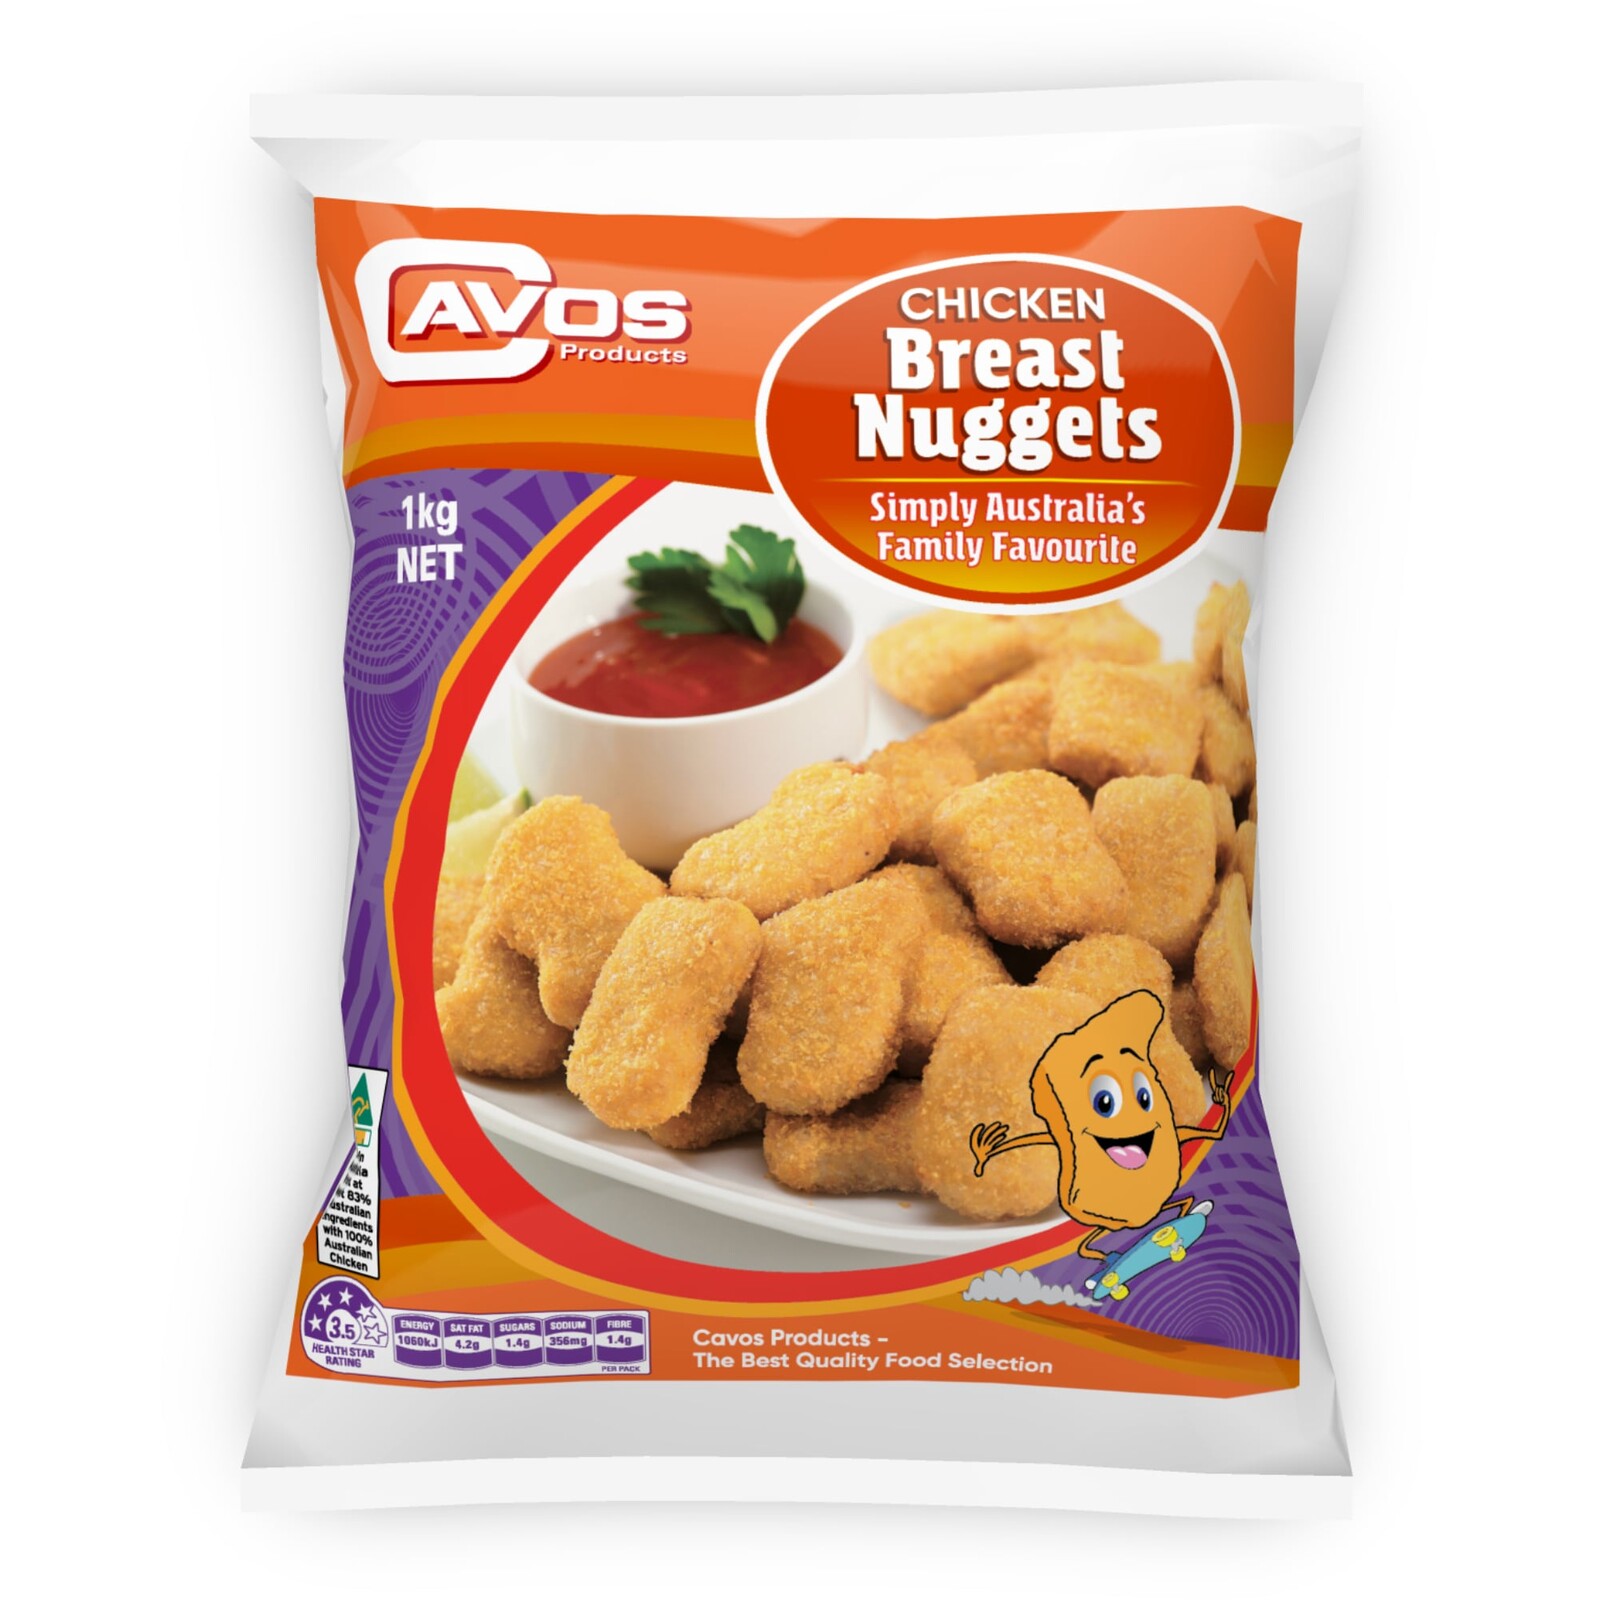 Cavos Products Crumbed Chicken Breast Nuggets